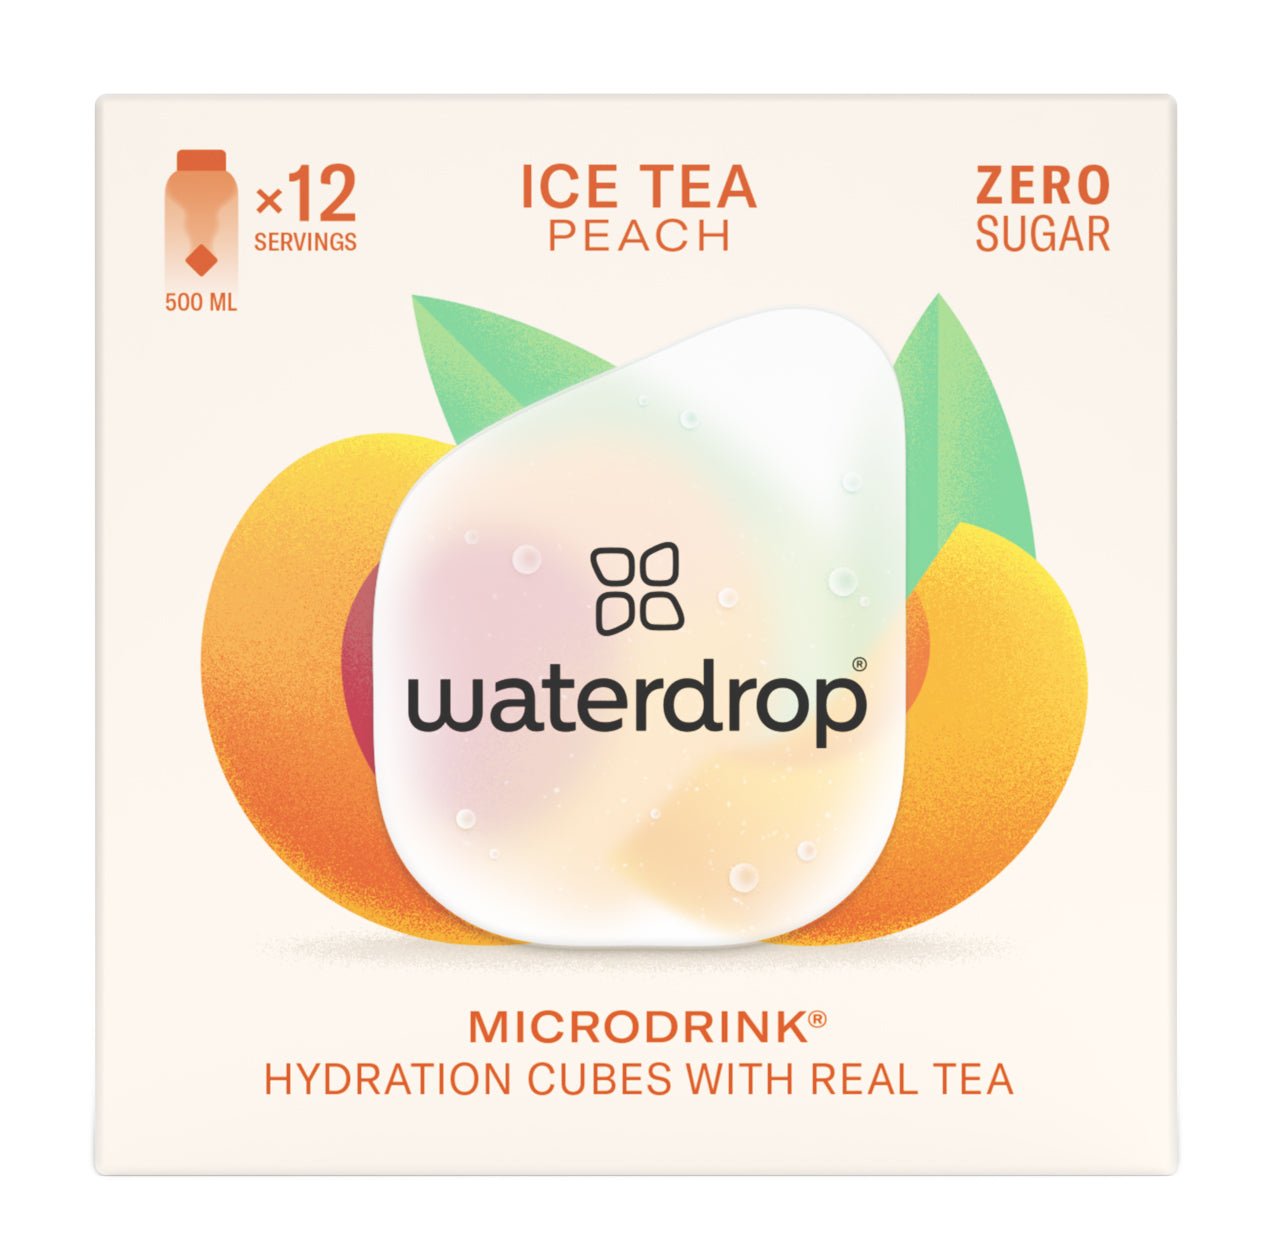 Waterdrop Microdrink Hydration Cubes with Real Tea (500ml x 12 Servings) - theskinnyfoodco